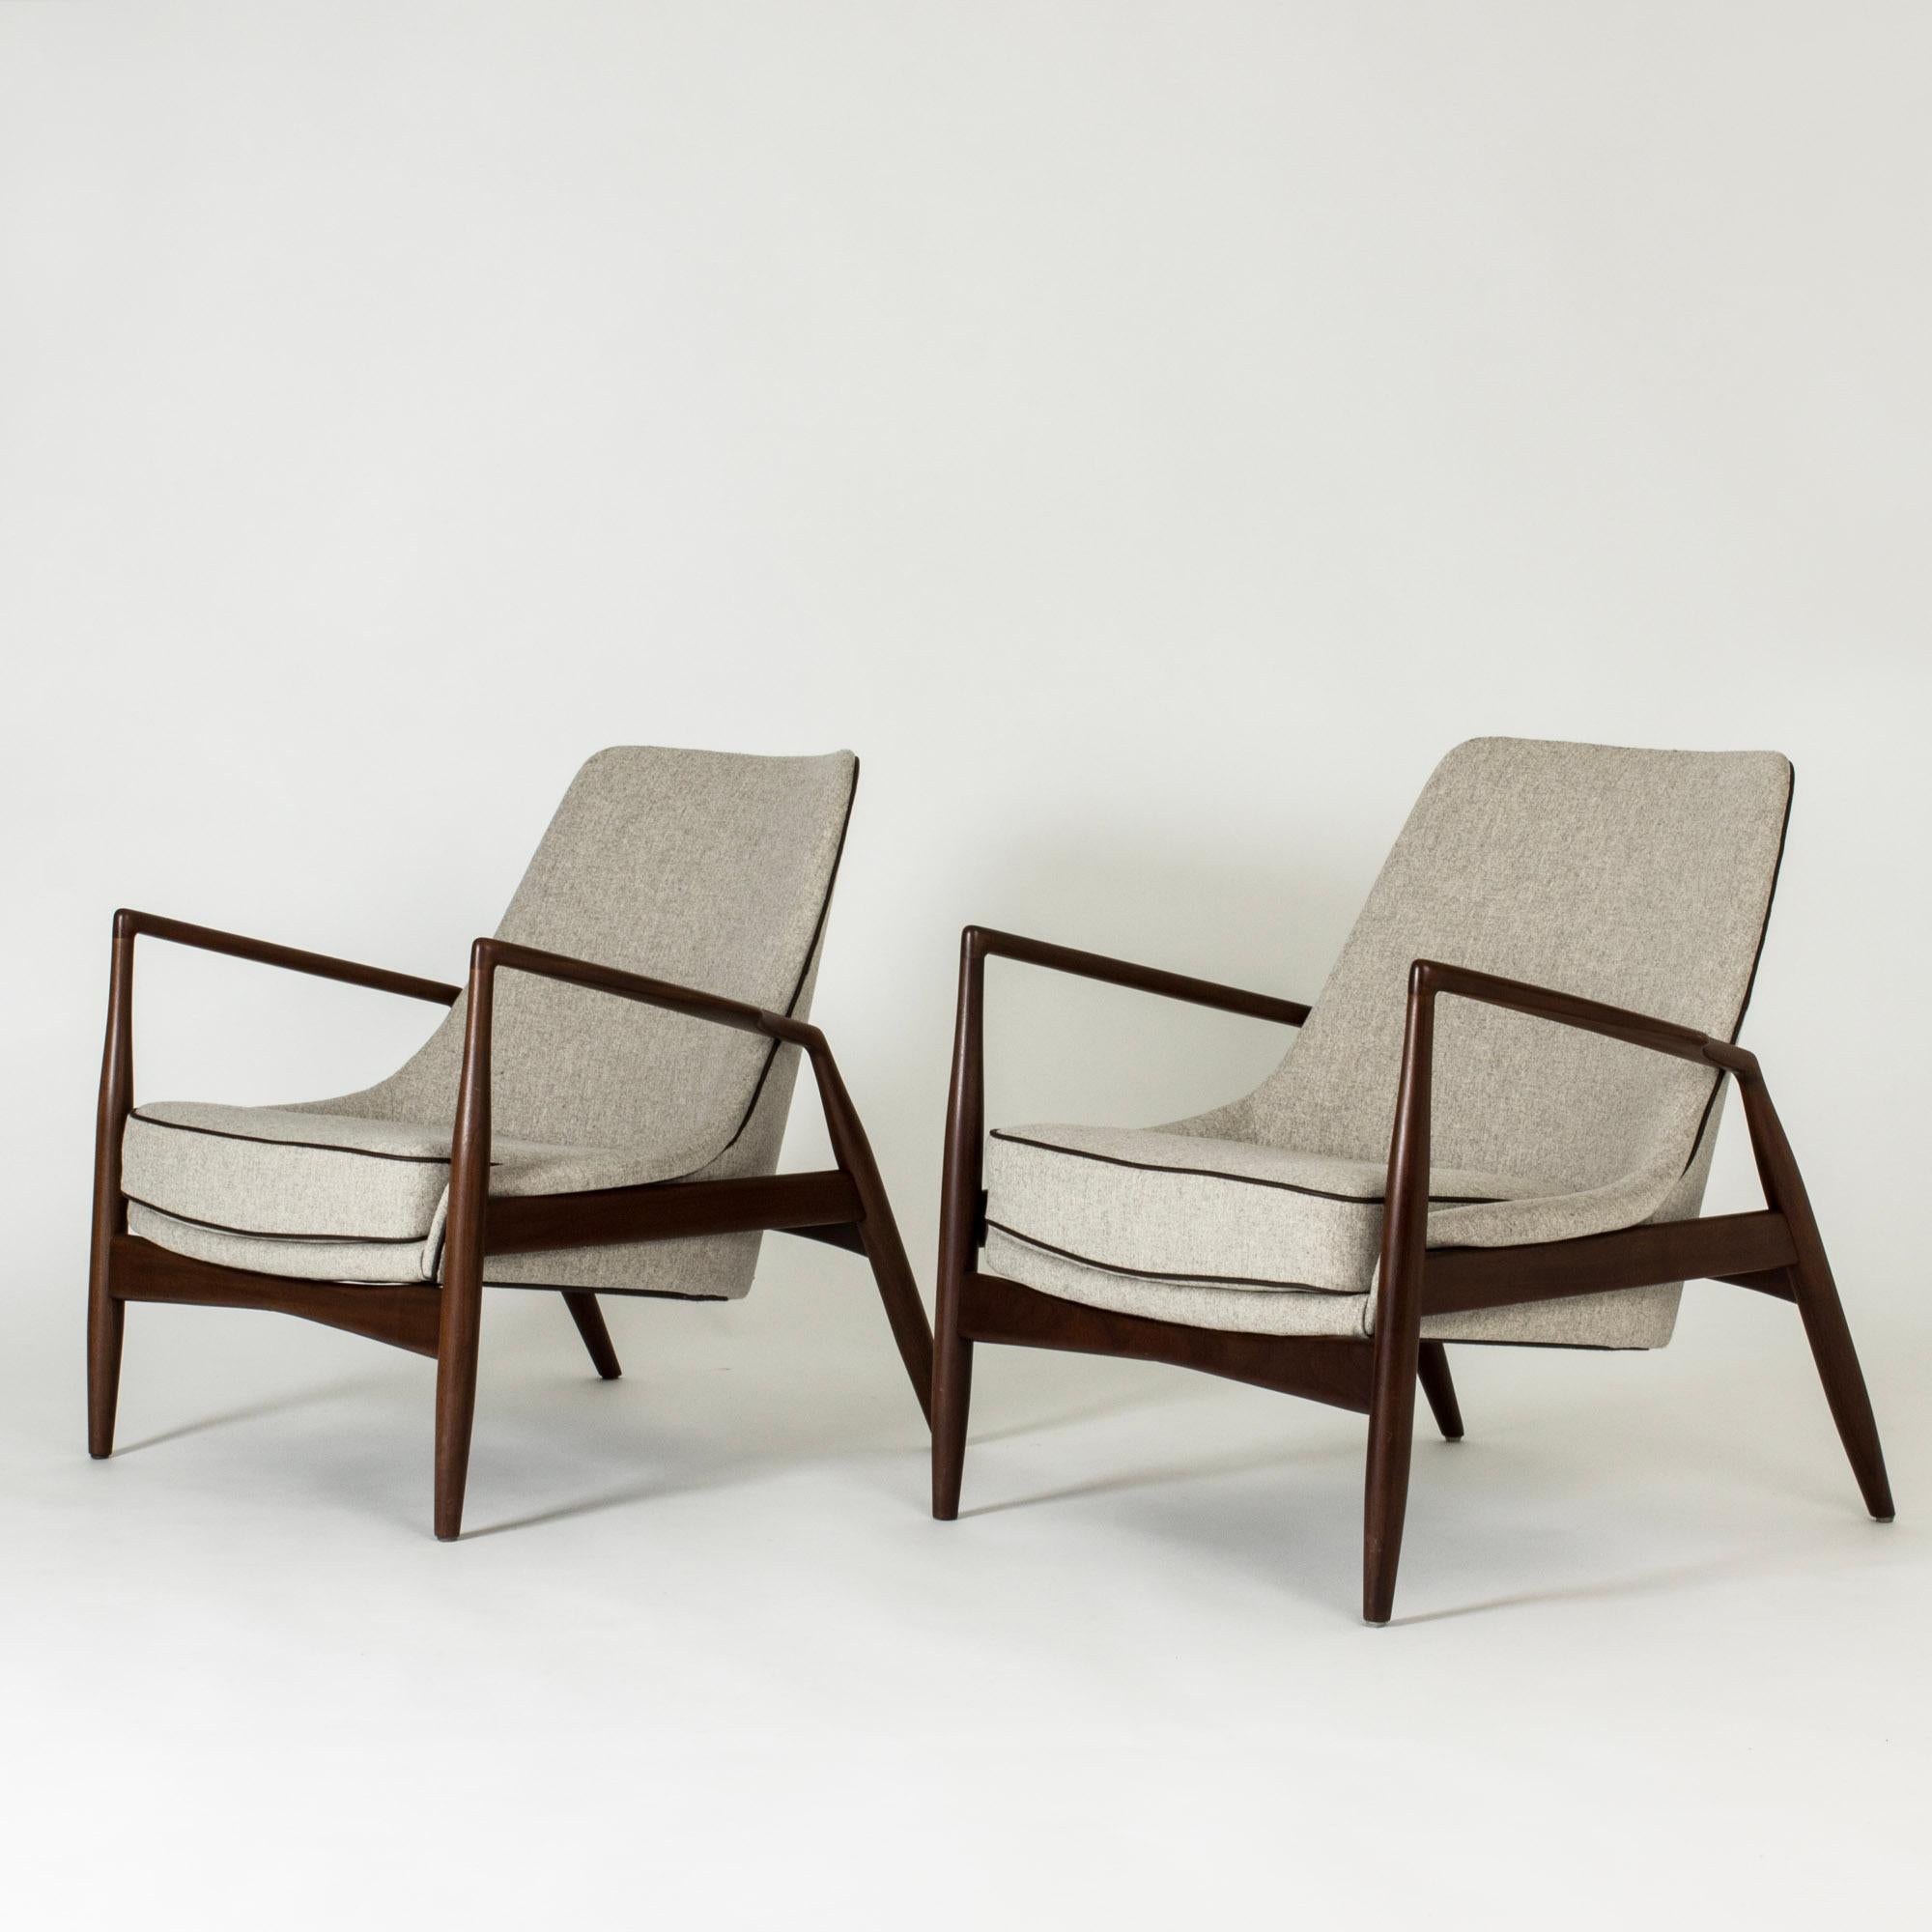 Pair of amazing “Seal” lounge chairs by Ib Kofod Larsen, made with teak frames. Light grey upholstery with dark brown leather piping. Great silhouettes and materials, sculpted winglike armrests.